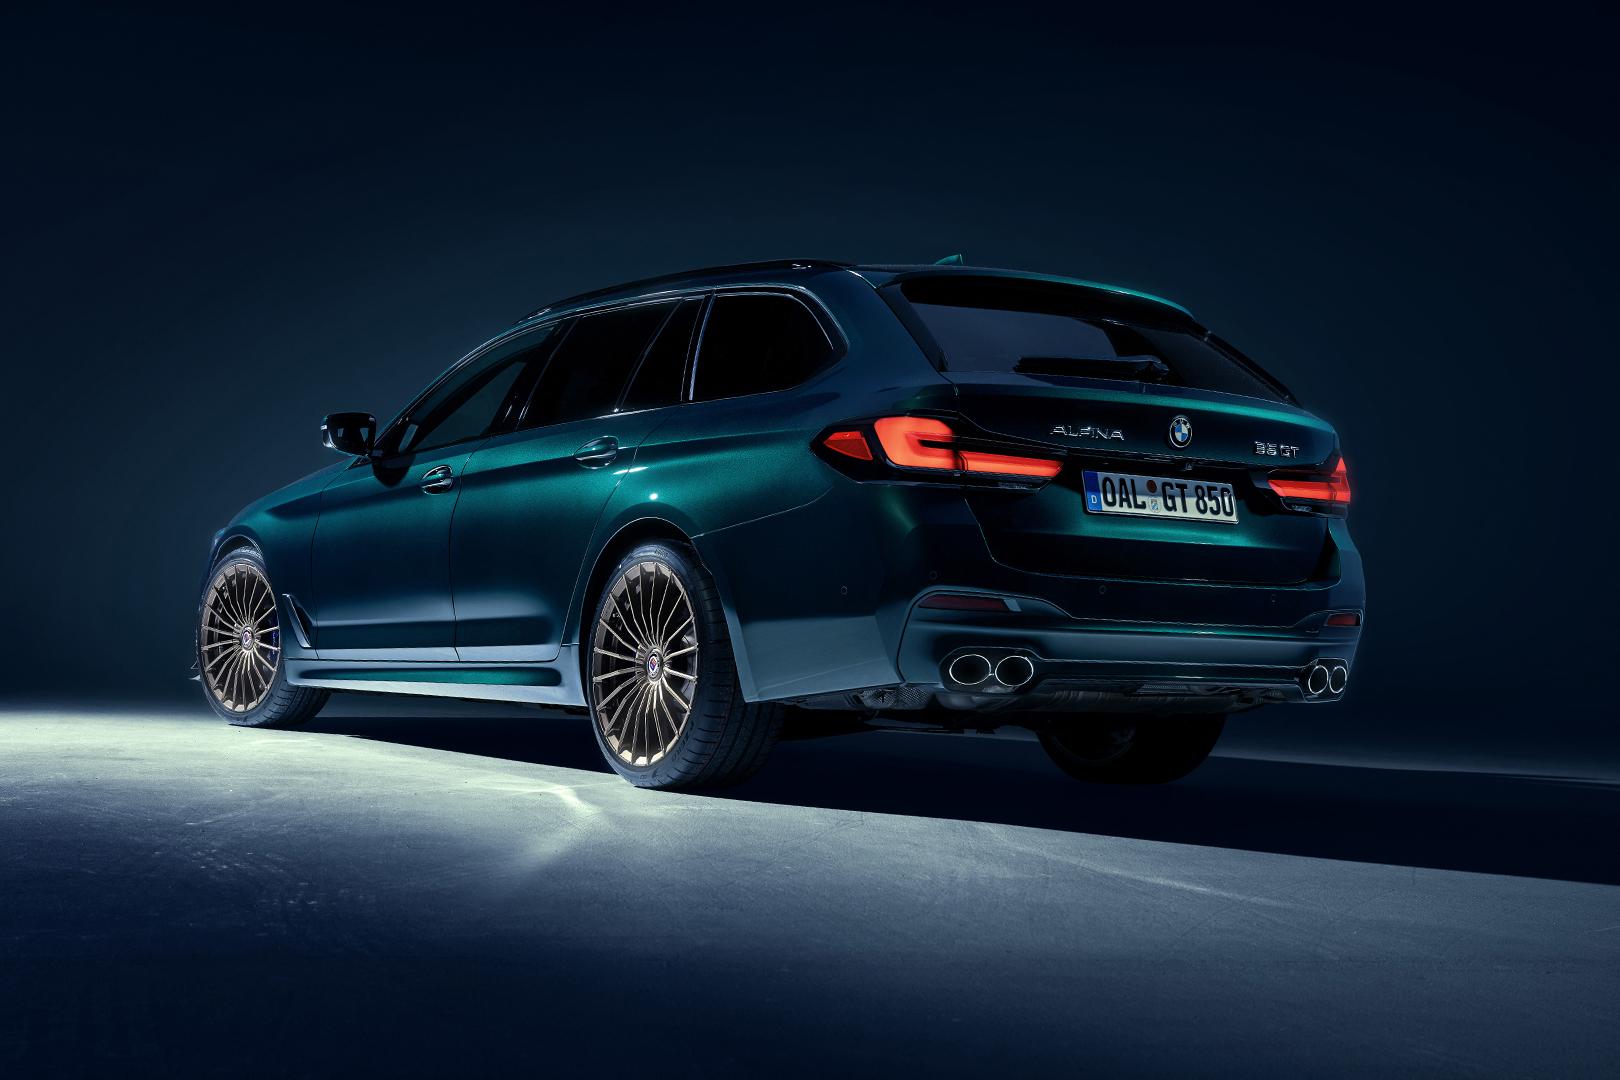 2023 Alpina B5 GT revealed as firm’s most powerful model